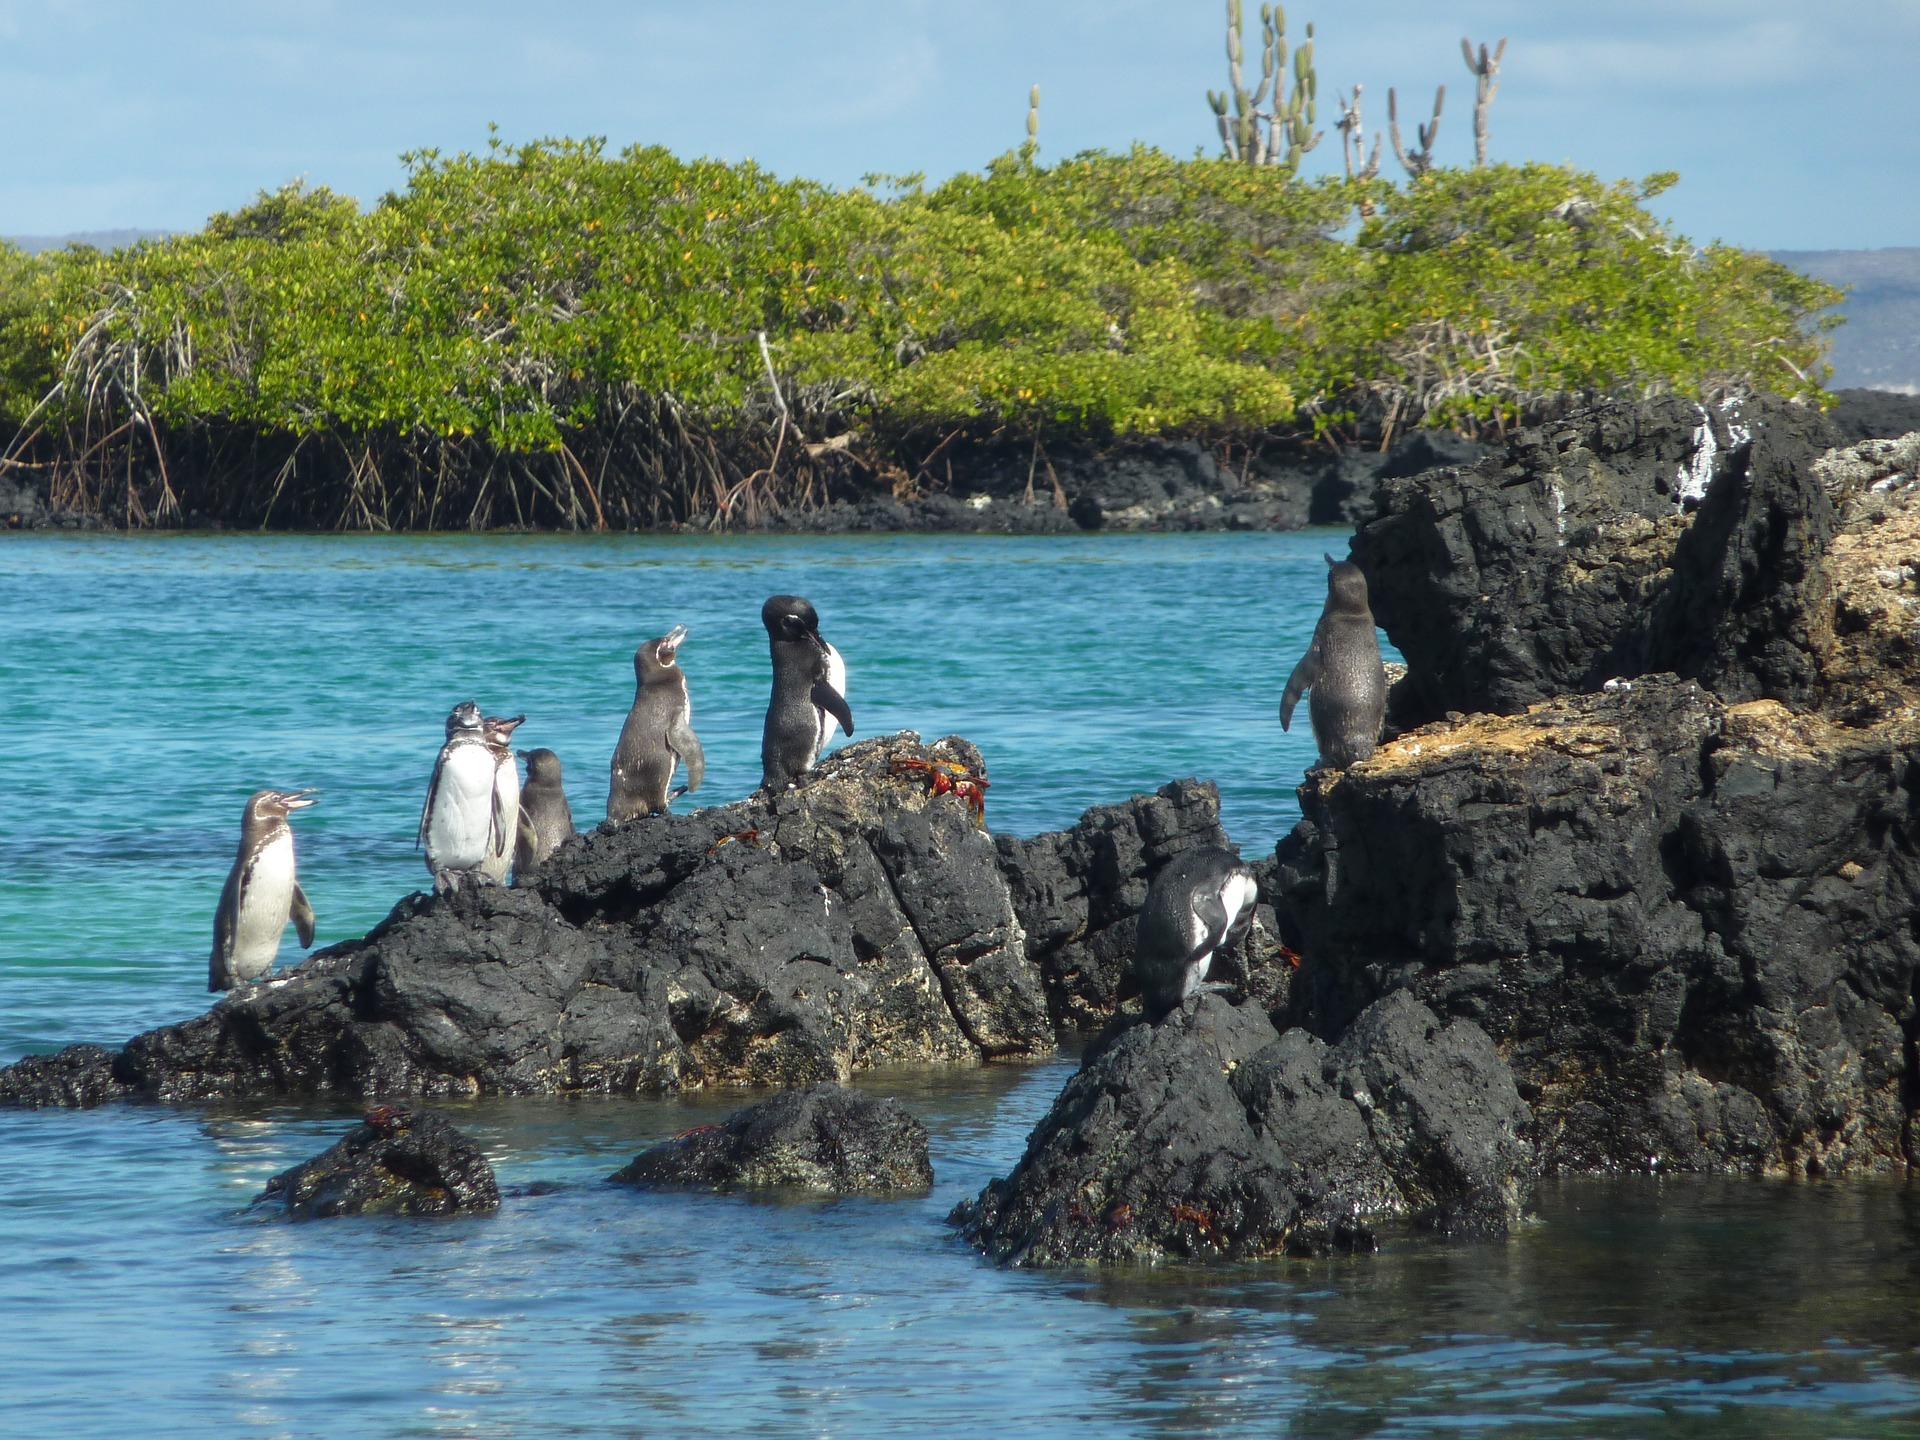 Forget Charles Darwin: Here are 15 Amazing Travel Experiences in the Galapagos Islands